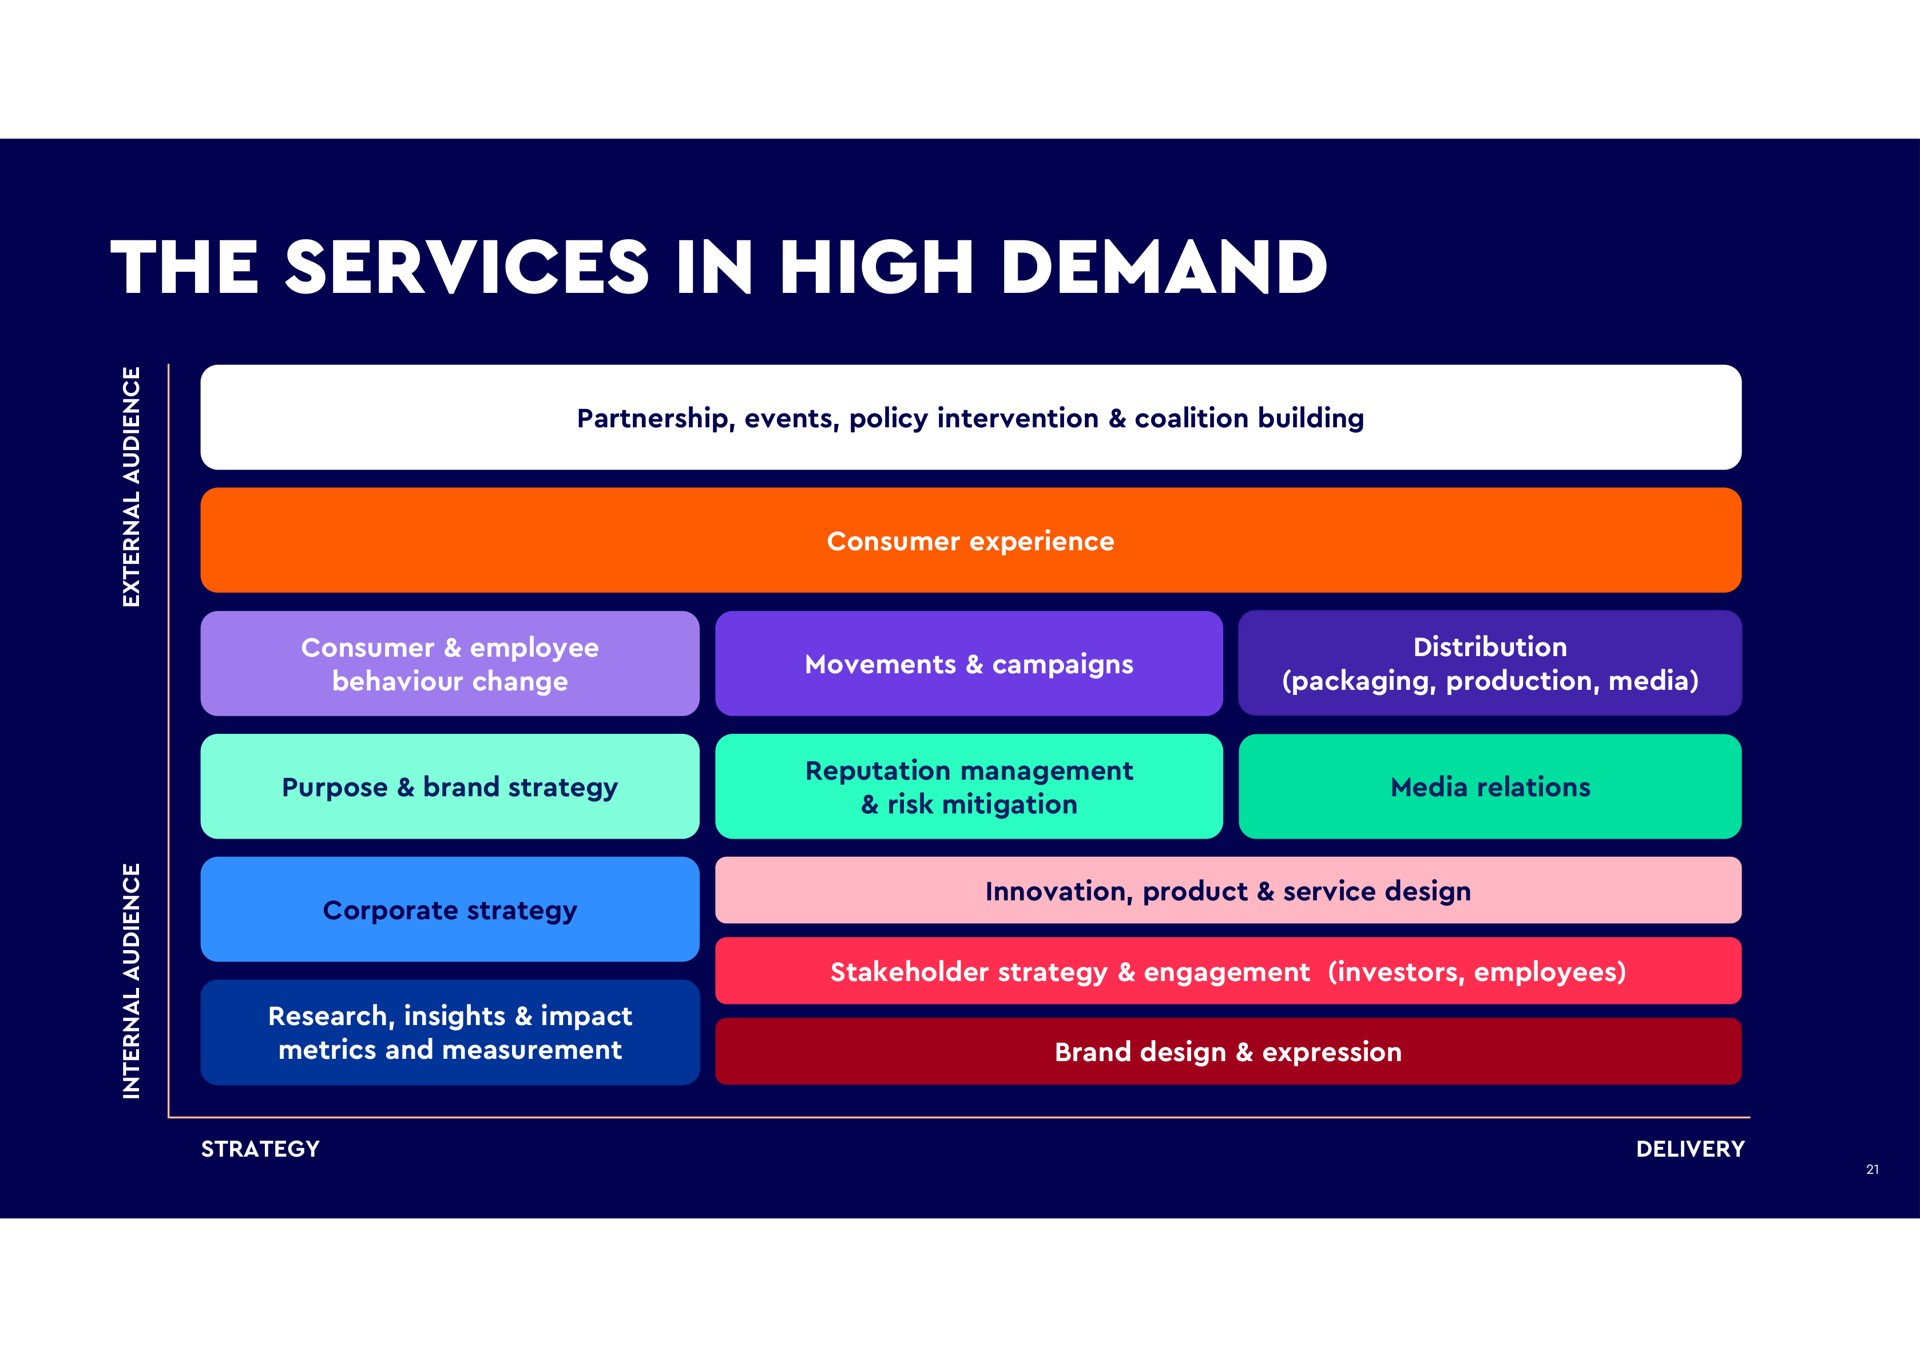 the services in high demand at ray partnership events policy intervention coalition building amar movements campaigns packaging production media purpose brand strategy reputation management media relations corporate strategy research insights impact metrics and measurement innovation product service design stakeholder strategy engagement investors employees brand design expression strategy be | WPP